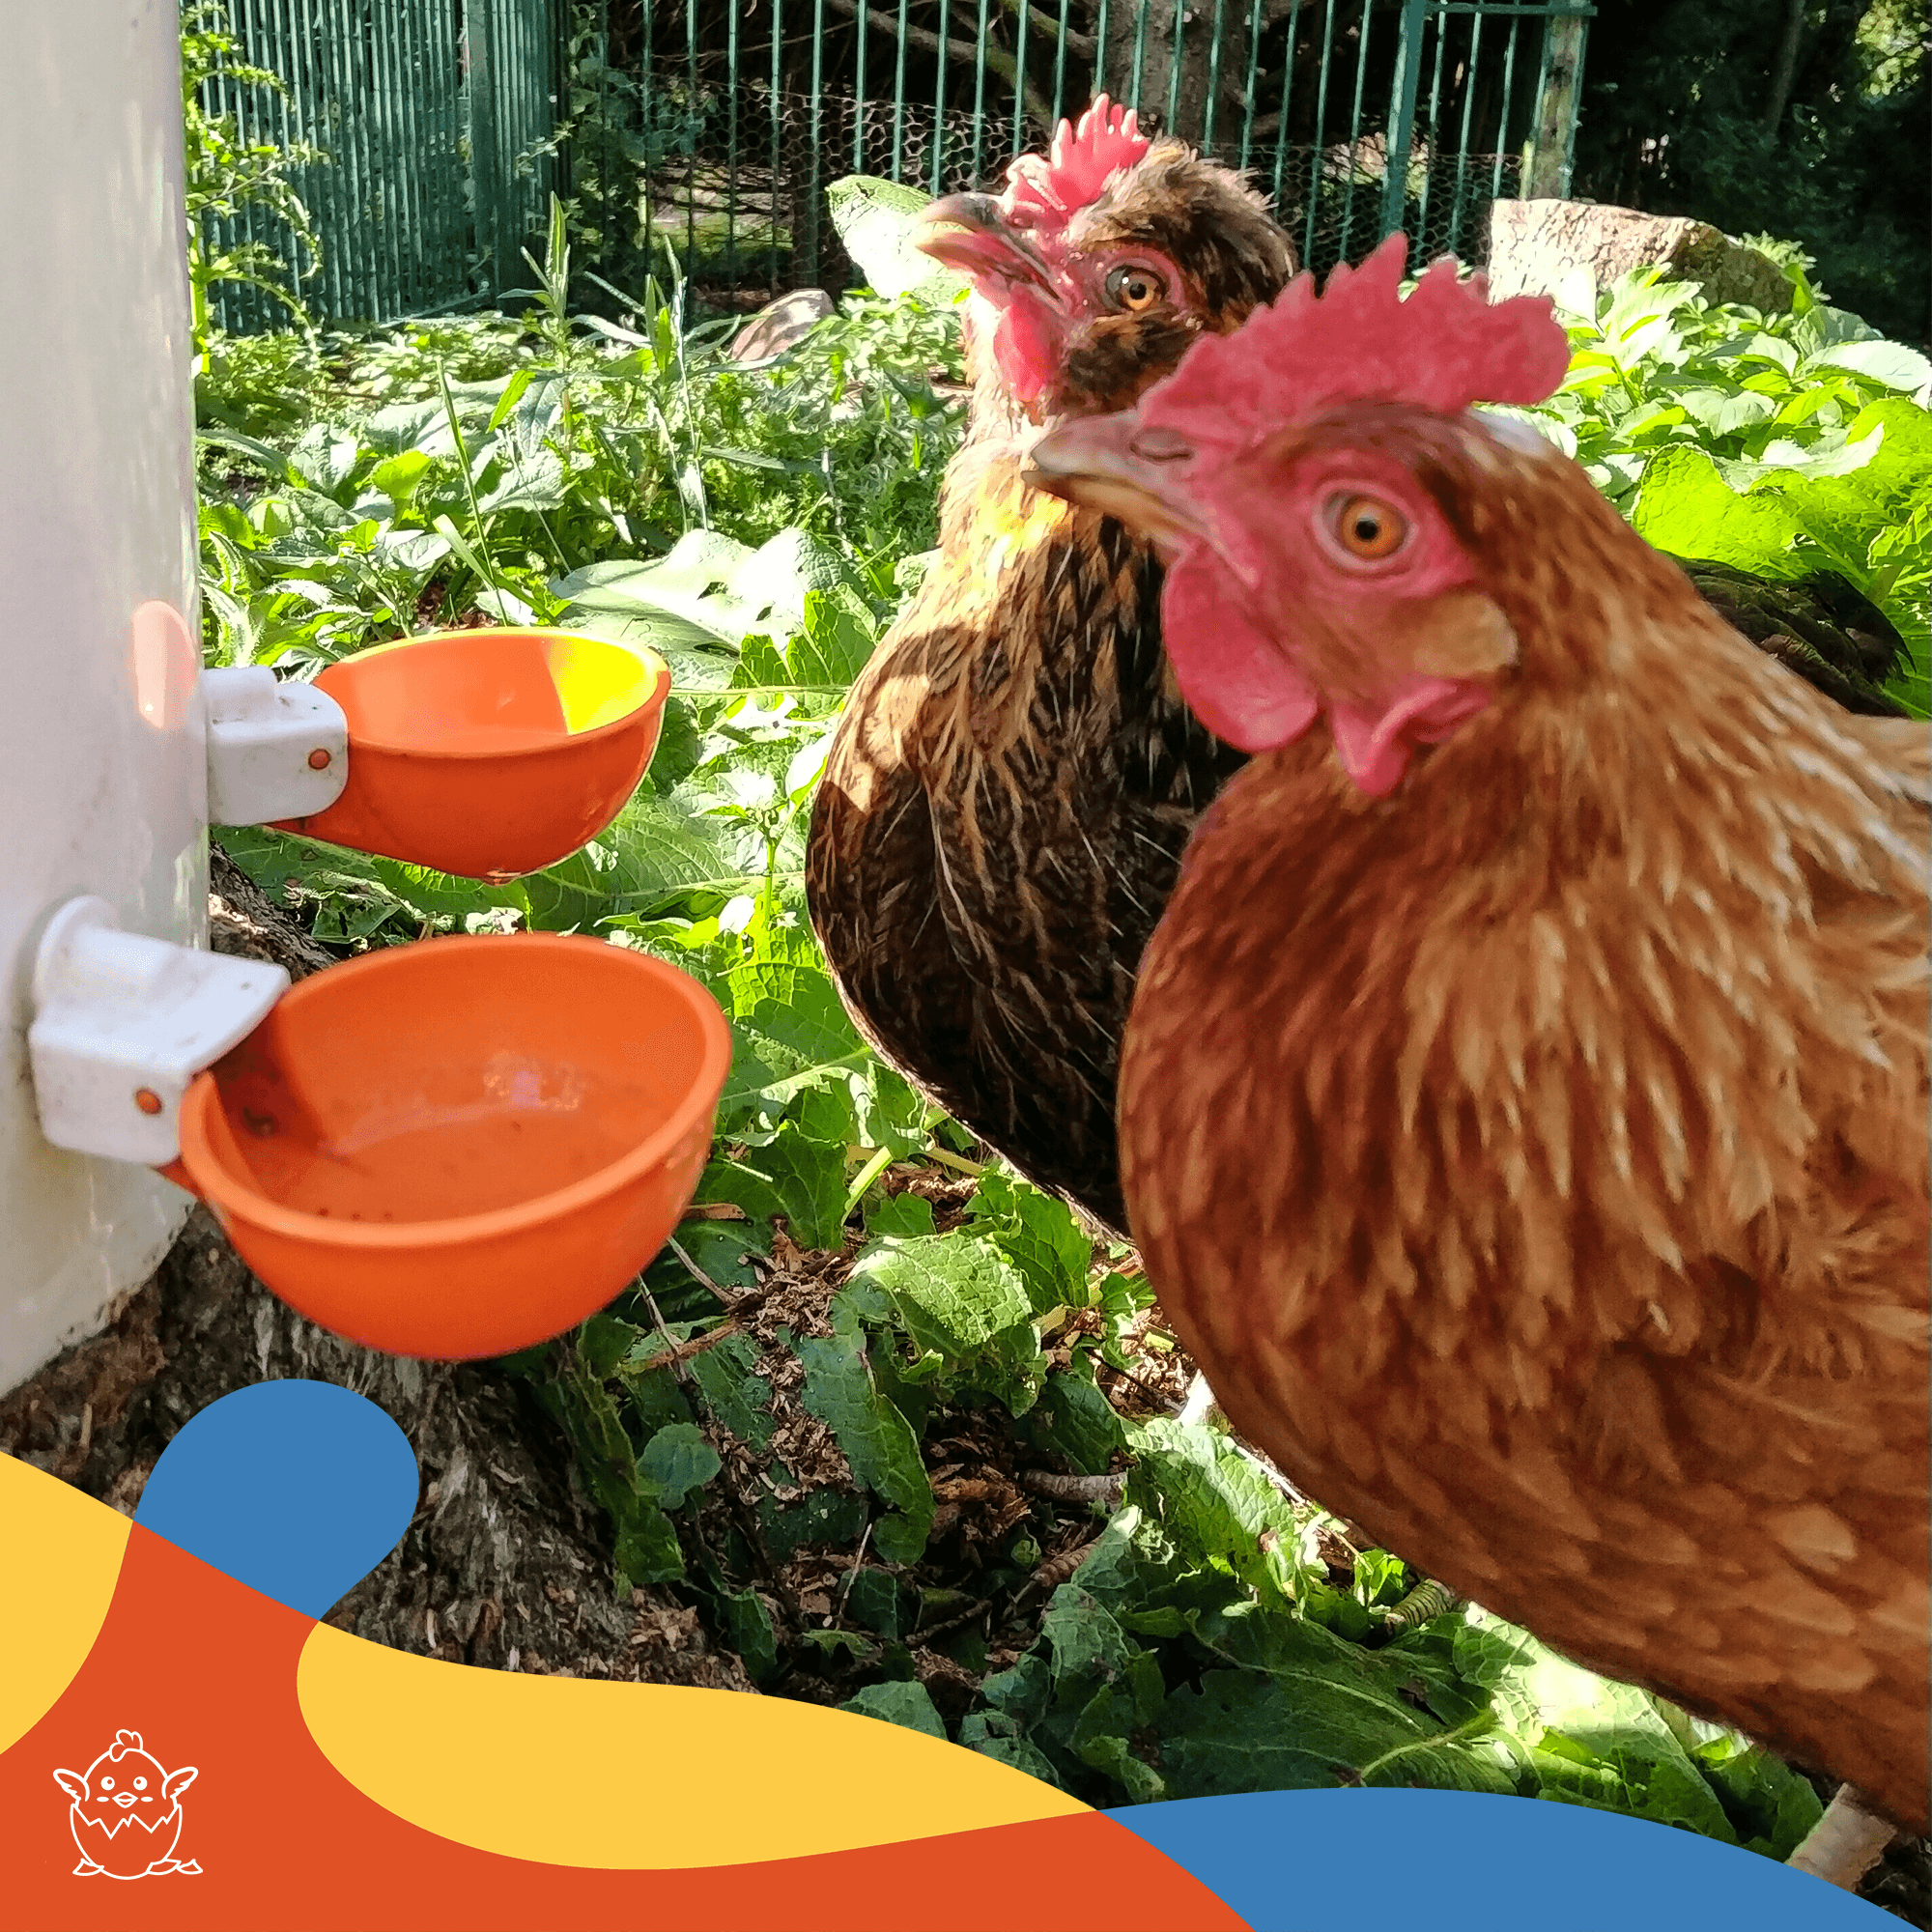 Large Automatic Chicken Waterer Cups - Pack of 5 (Orange) - Lil'Clucker